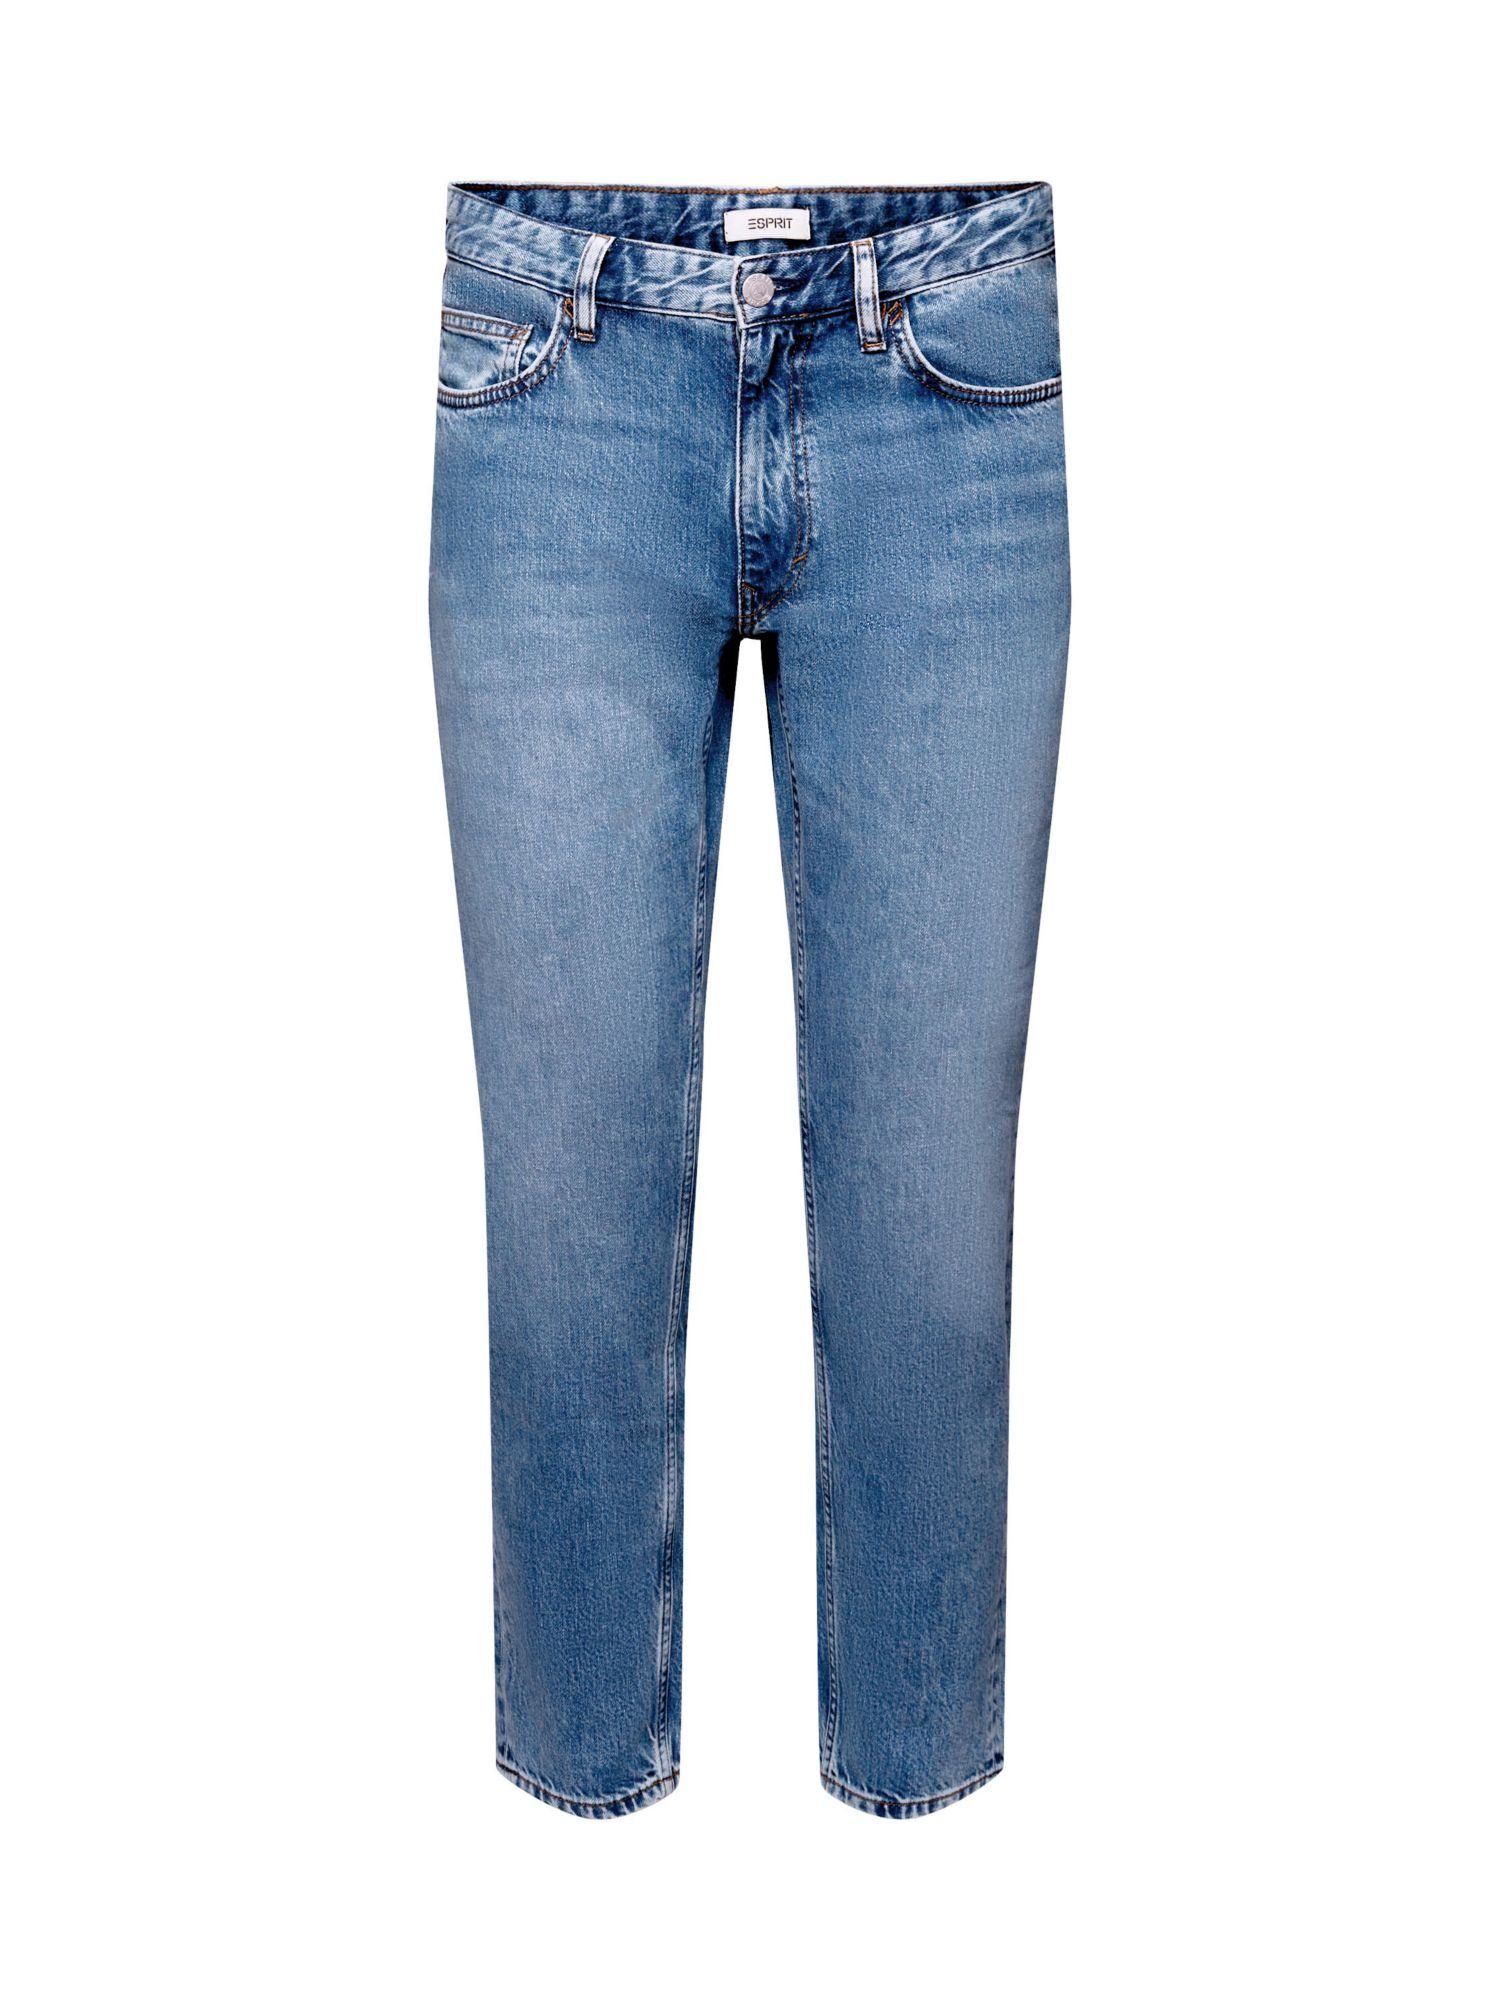 Esprit Relax-fit-Jeans Jeans in bequemer, schmaler Passform